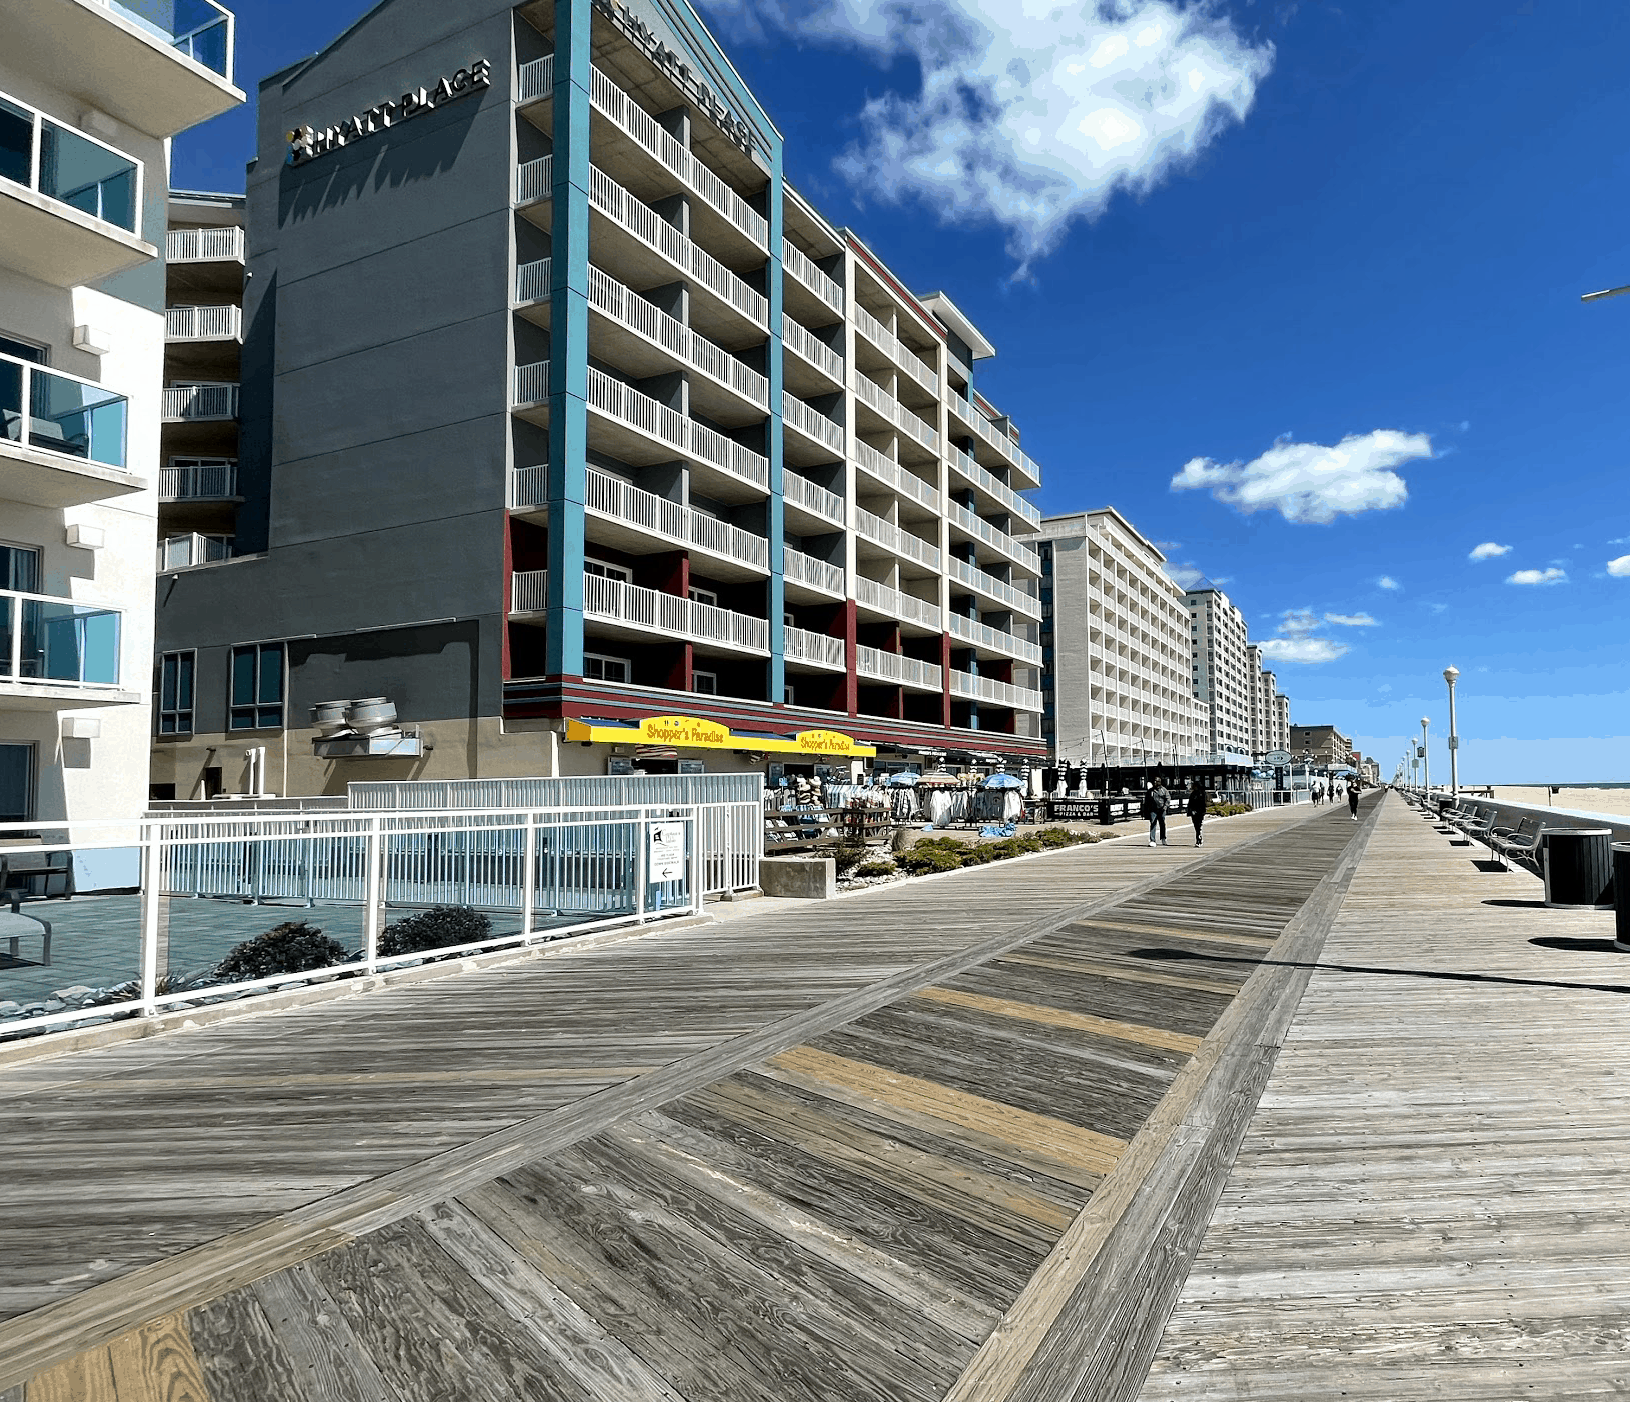 Our Top 10 Ocean City, Maryland Boardwalk Hotels